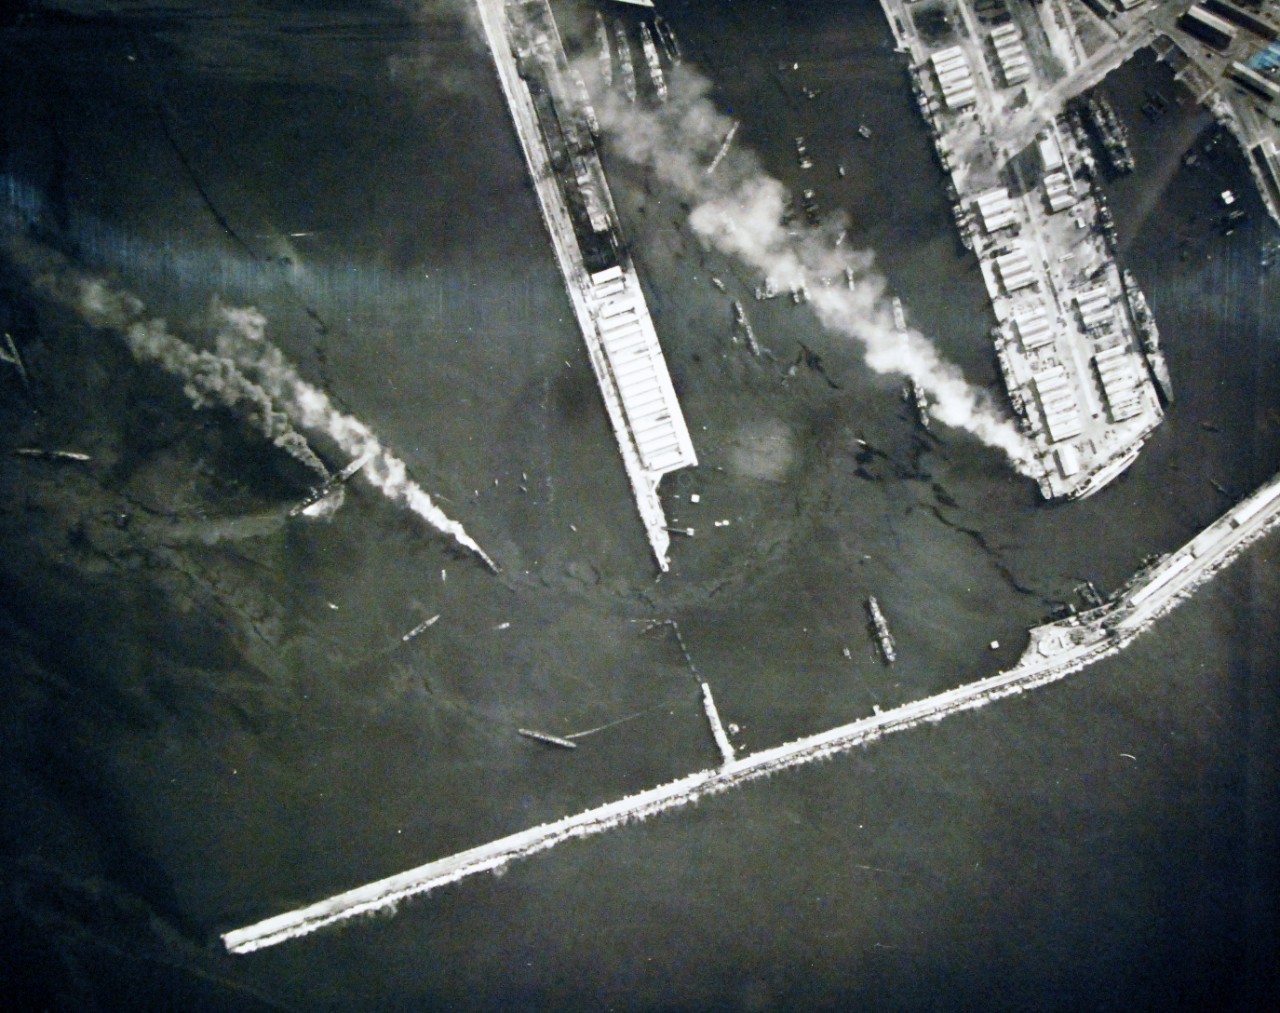 <p>19-LCM-North Africa-5: Naval Battle of Casablanca, November 8-16, 1942. Casablanca, French Morocco. On the morning after the first attack this aerial reconnaissance photograph was taken from a U.S. Navy plane. It shows five burning French ships in the various harbors of Casablanca. One can be seen burning at the end of the large pier (top). The other four are in the outer harbor, ranging from center to left, and in the extreme lower left corner. At the end of the large pier, the French merchant ship Porthos can be seen lying on its side. Photograph released on 1 December 1942.&nbsp;</p>
